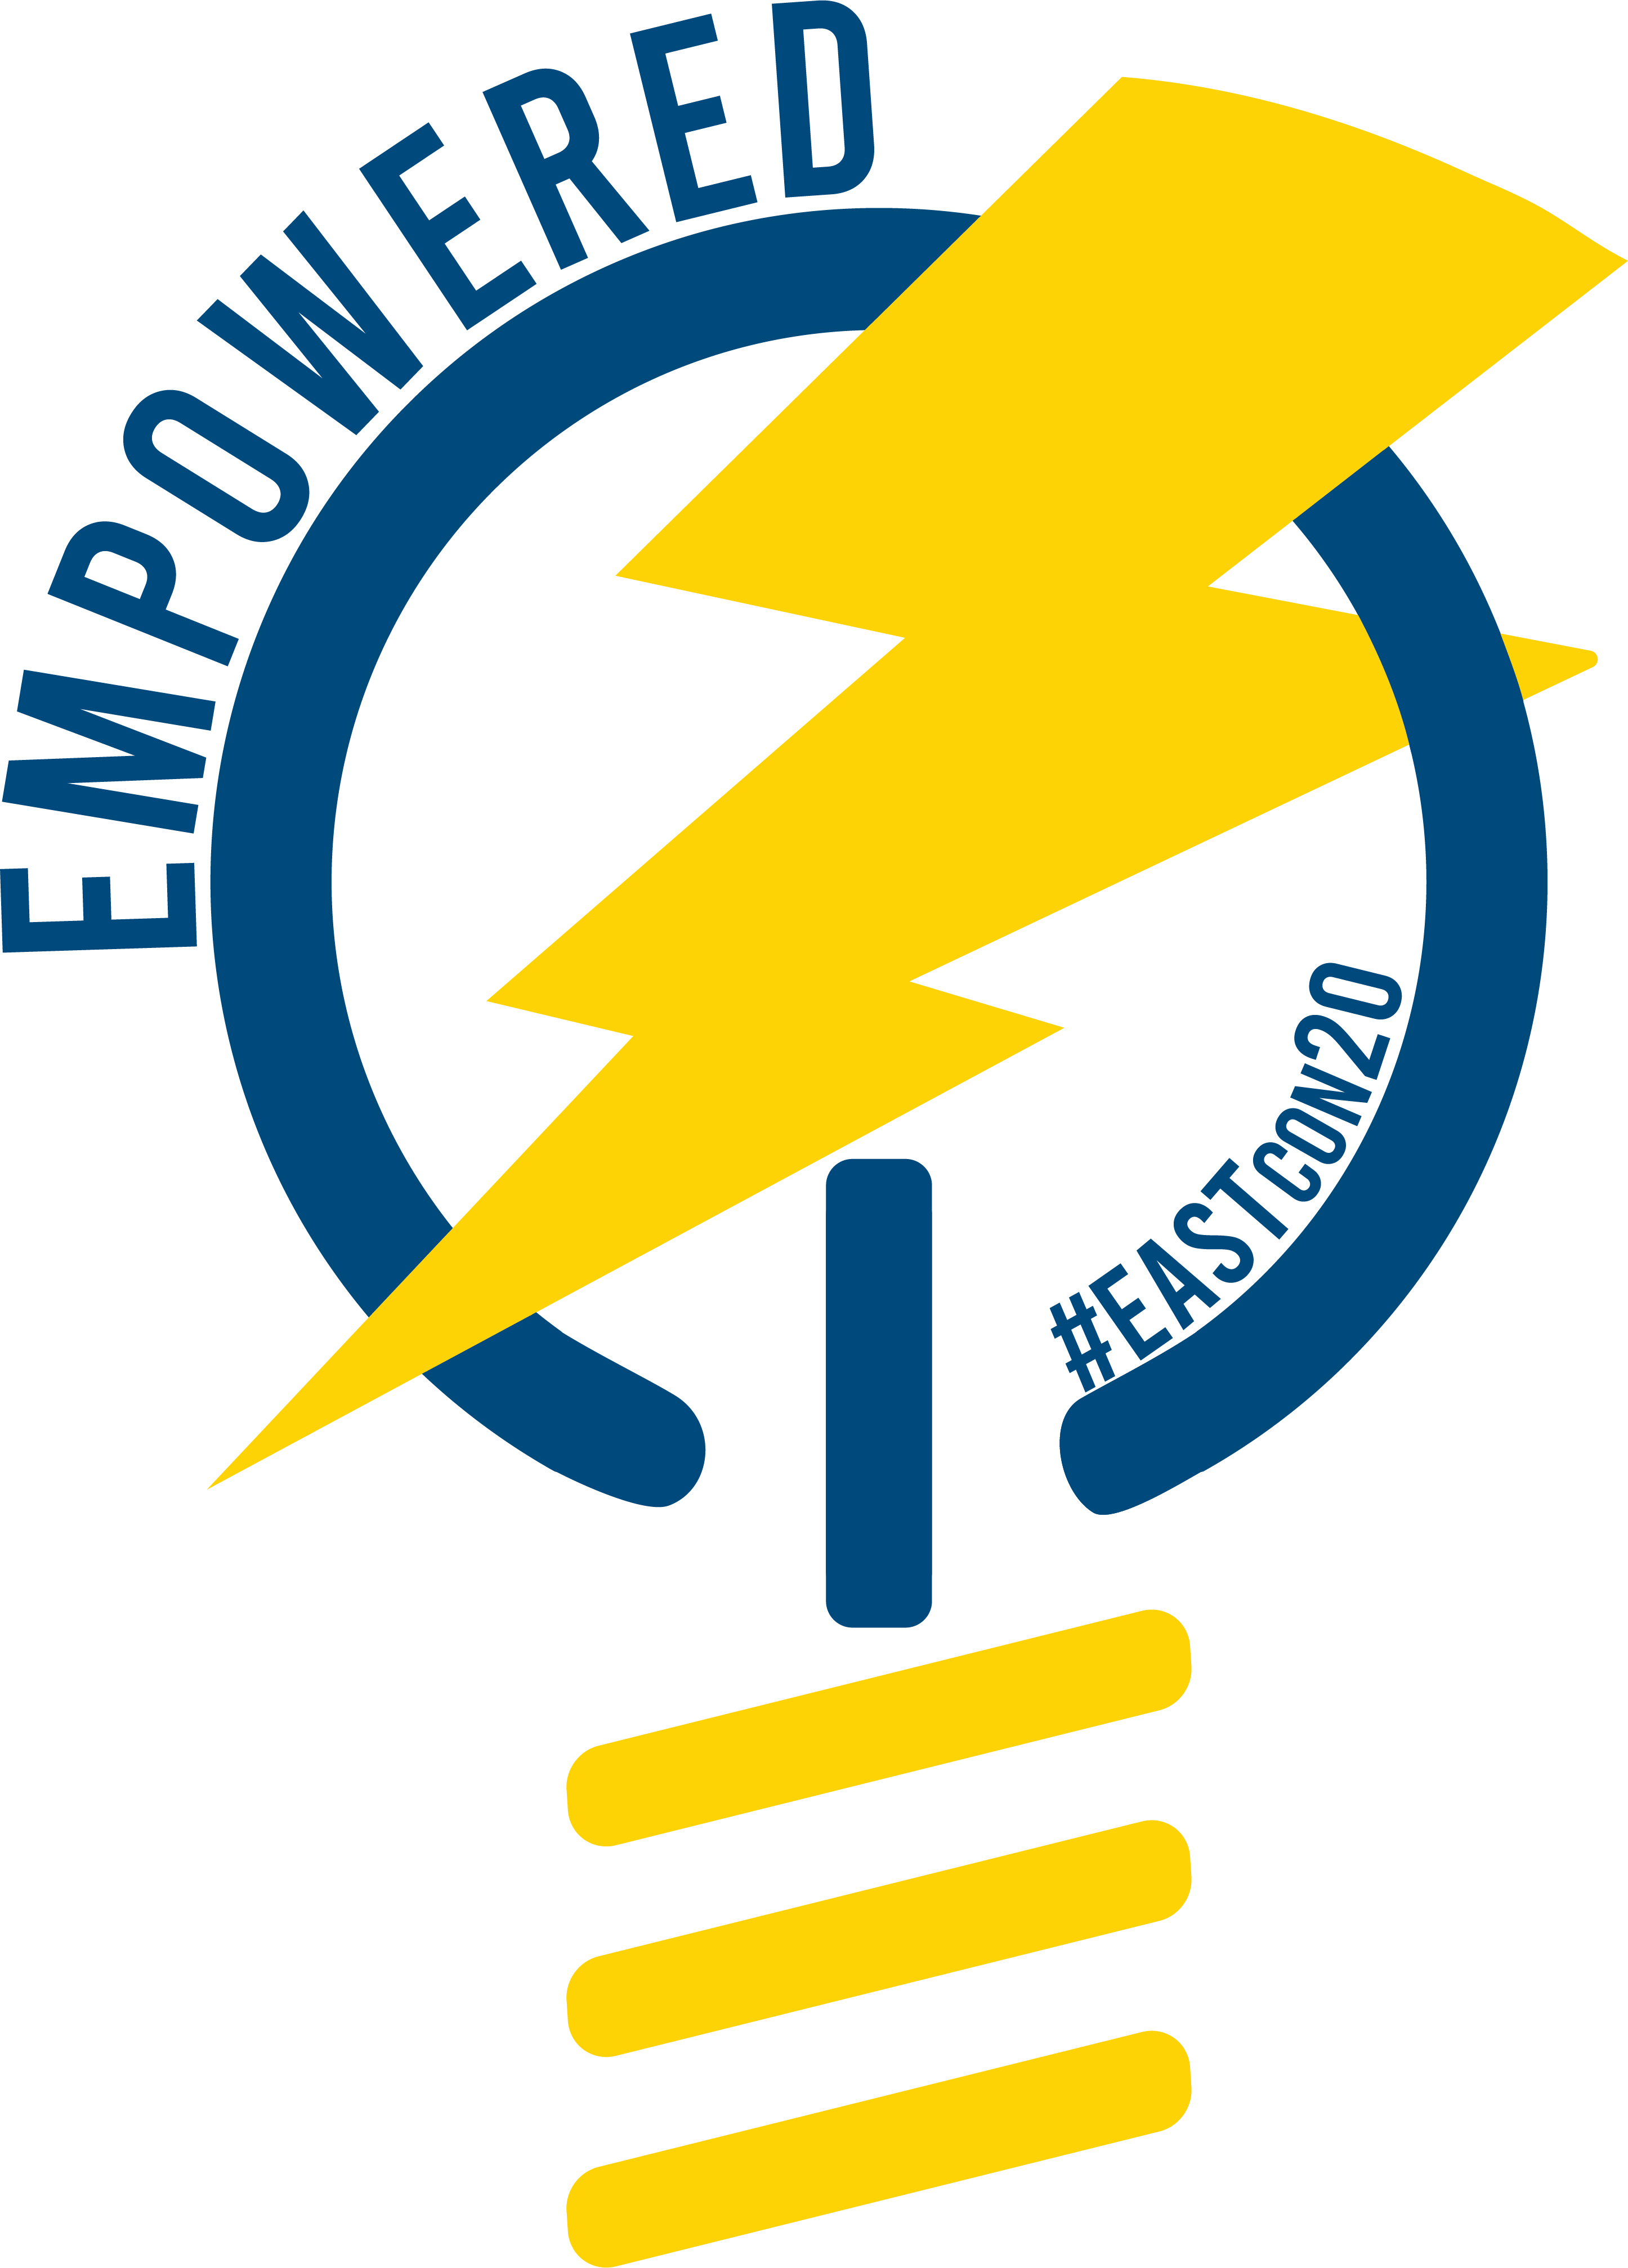 EAST Conference Logo